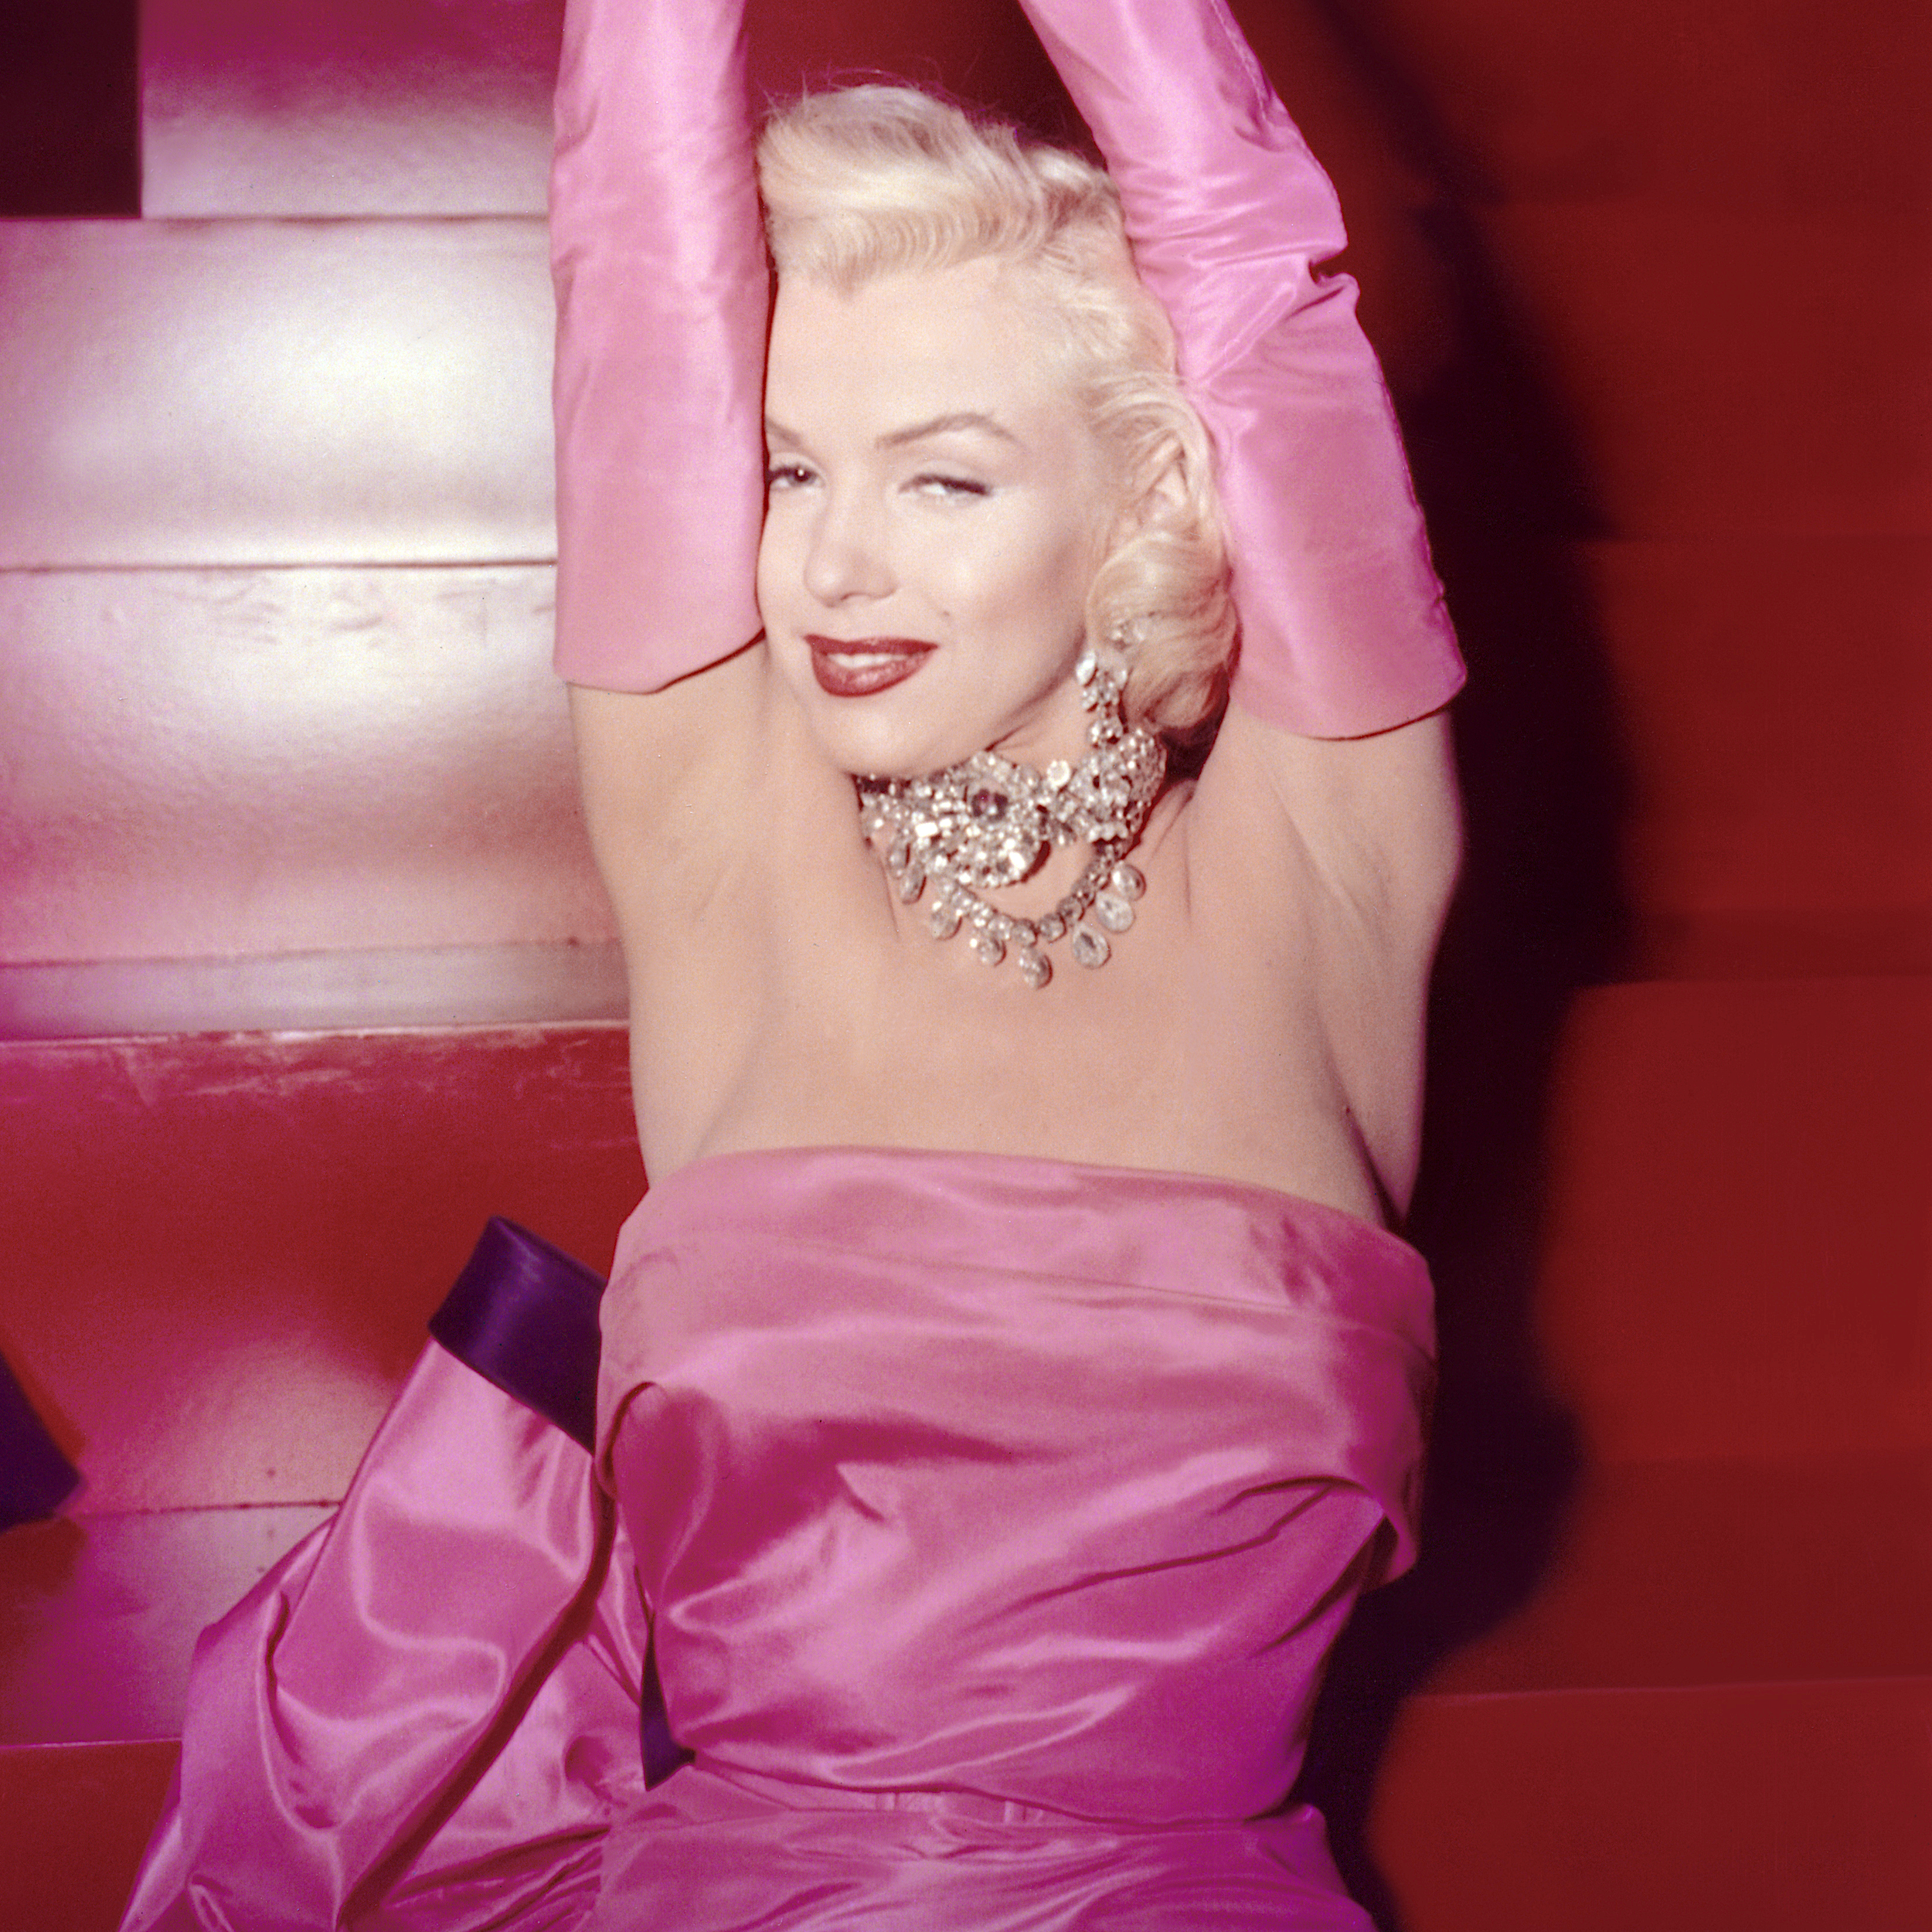 8 Best Marilyn Monroe Movies And Performances To Cherish